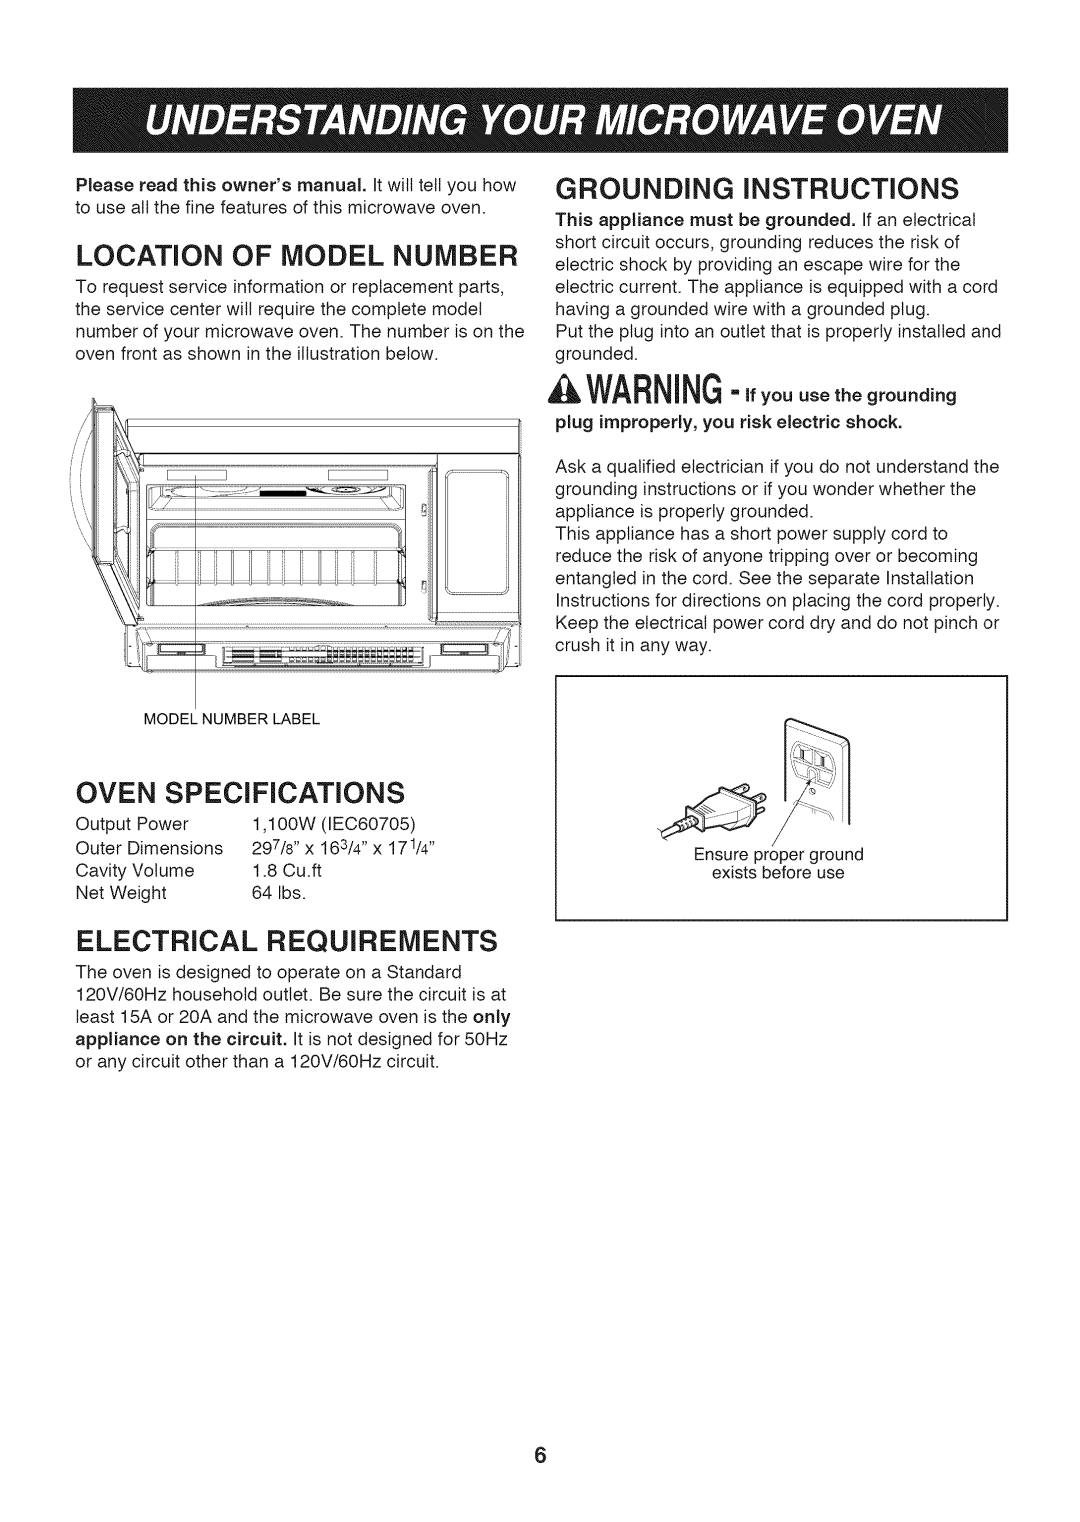 LG Electronics LMV1813ST Location Of Model Number, Grounding Instructions, Oven Specifications, Electrical Requirements 